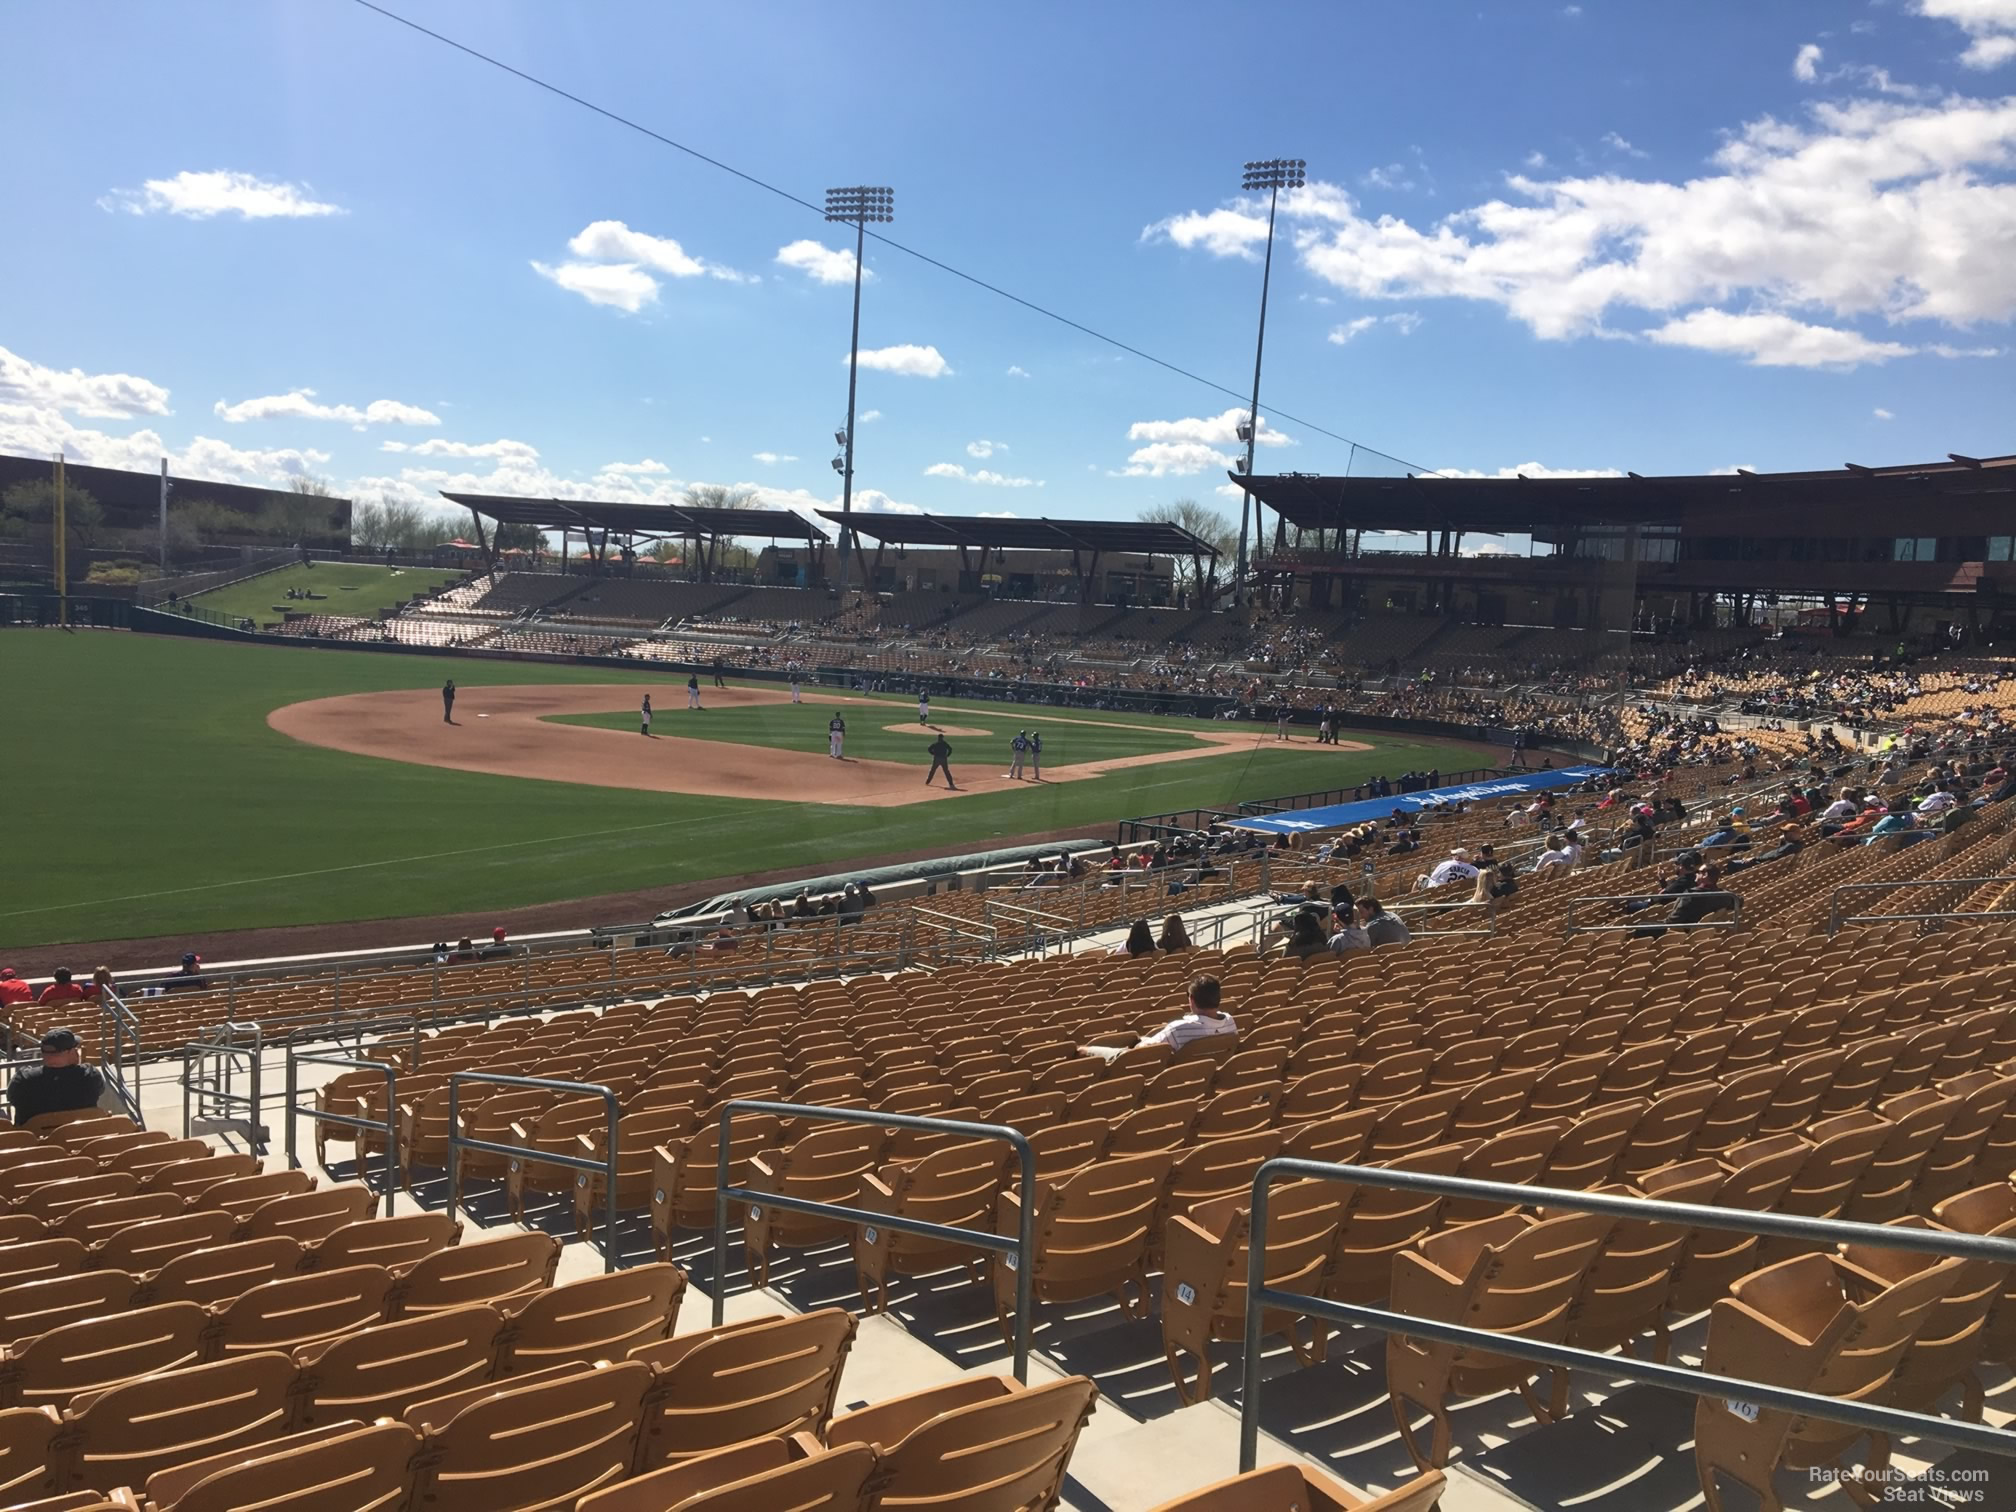 section 128, row 19 seat view  - camelback ranch